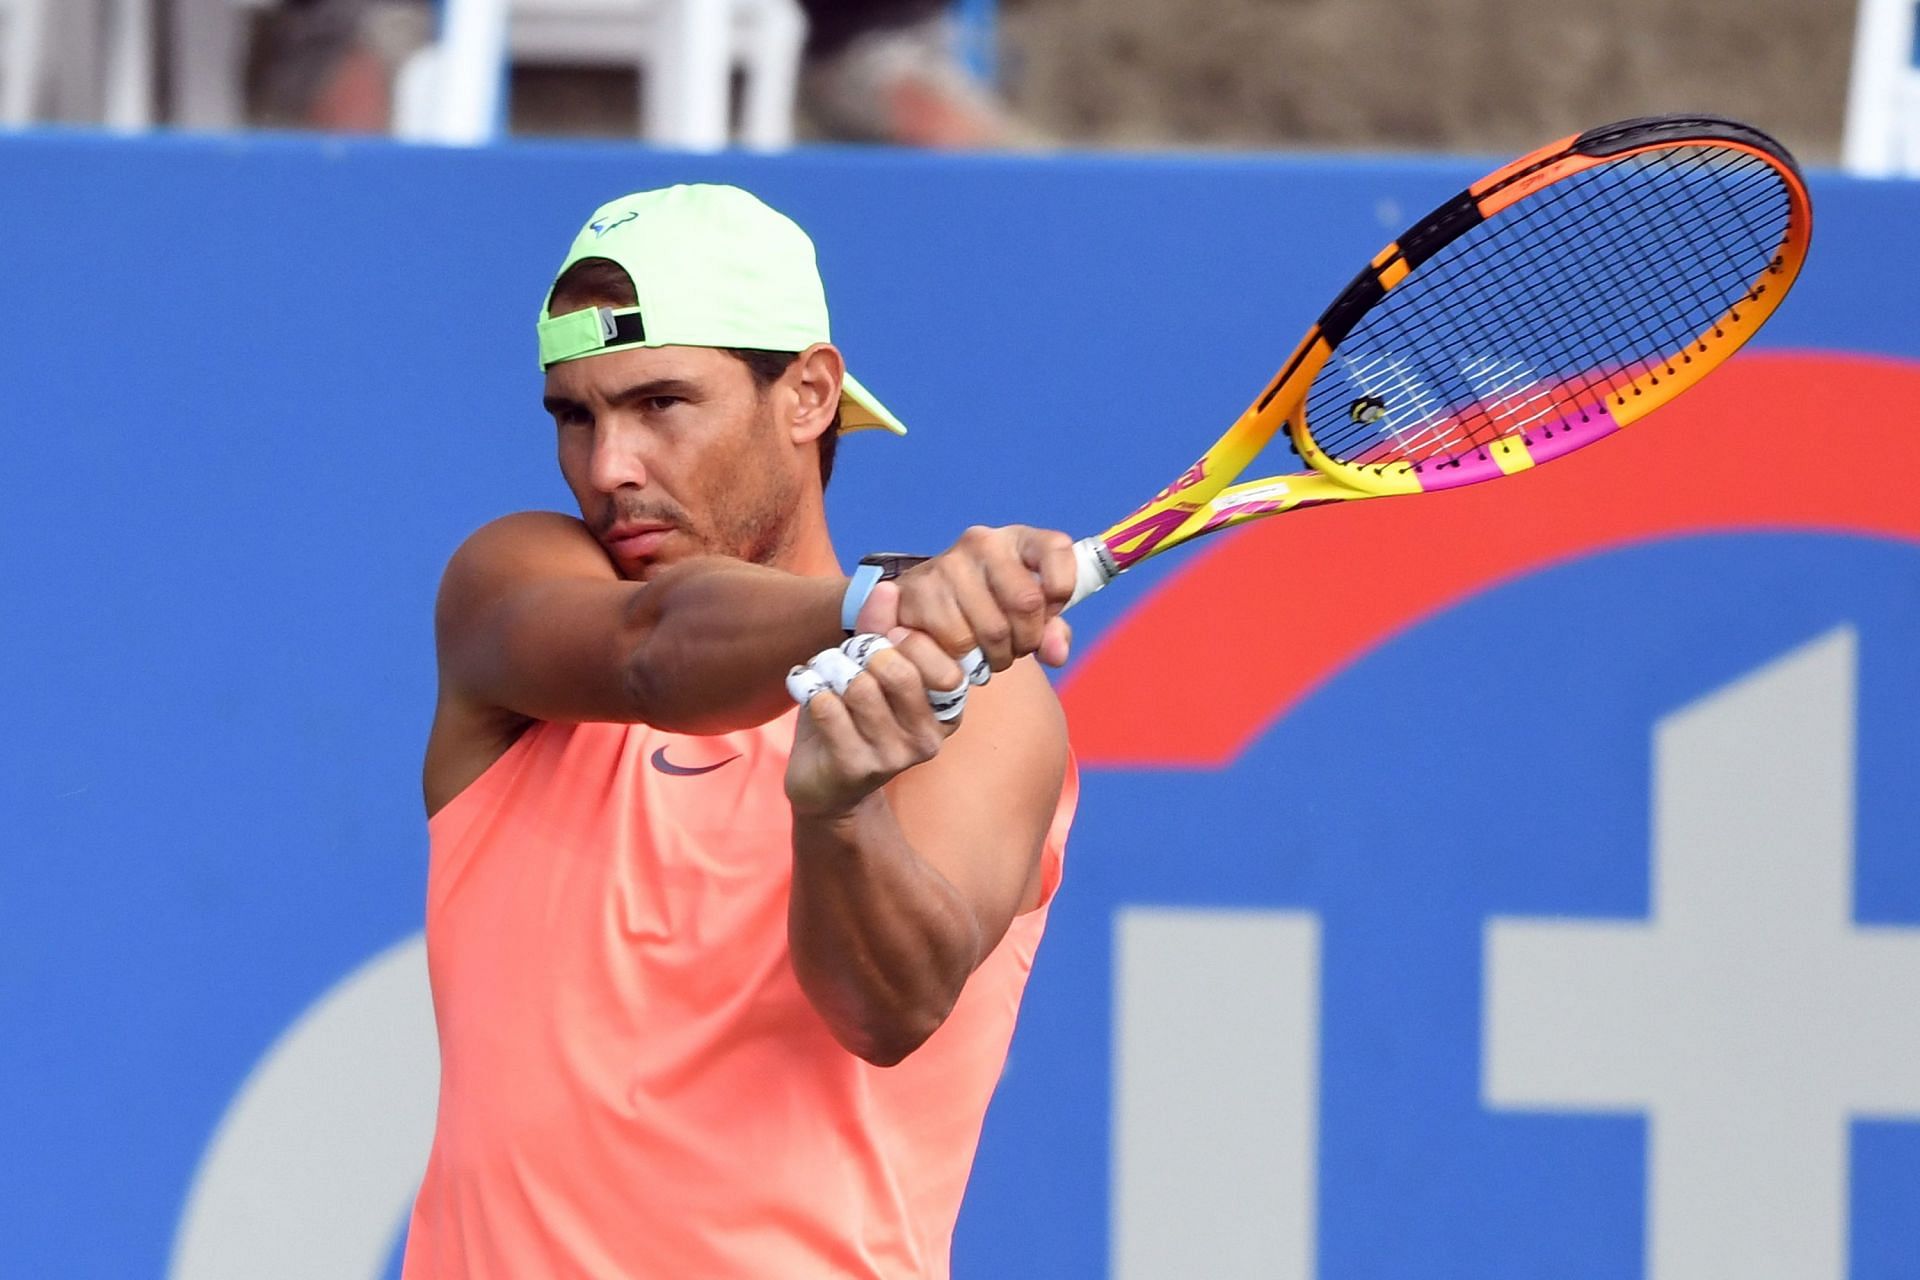 Rafael Nadal during a traning session at the 2021 Citi Open.